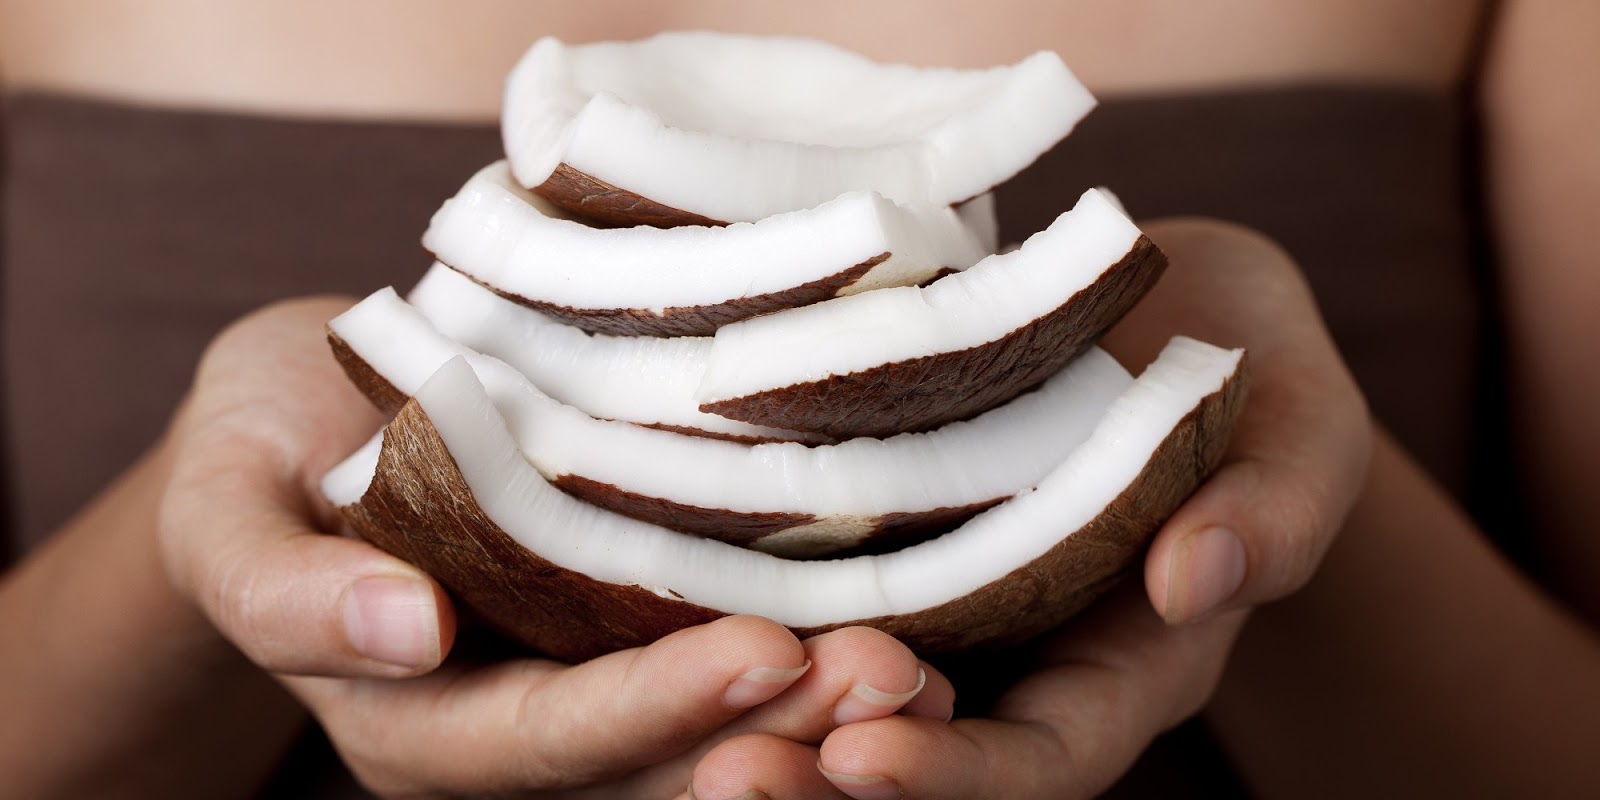 Study Confirms Only 1 TBSP of Coconut Oil Produces Powerful Changes To Your Health